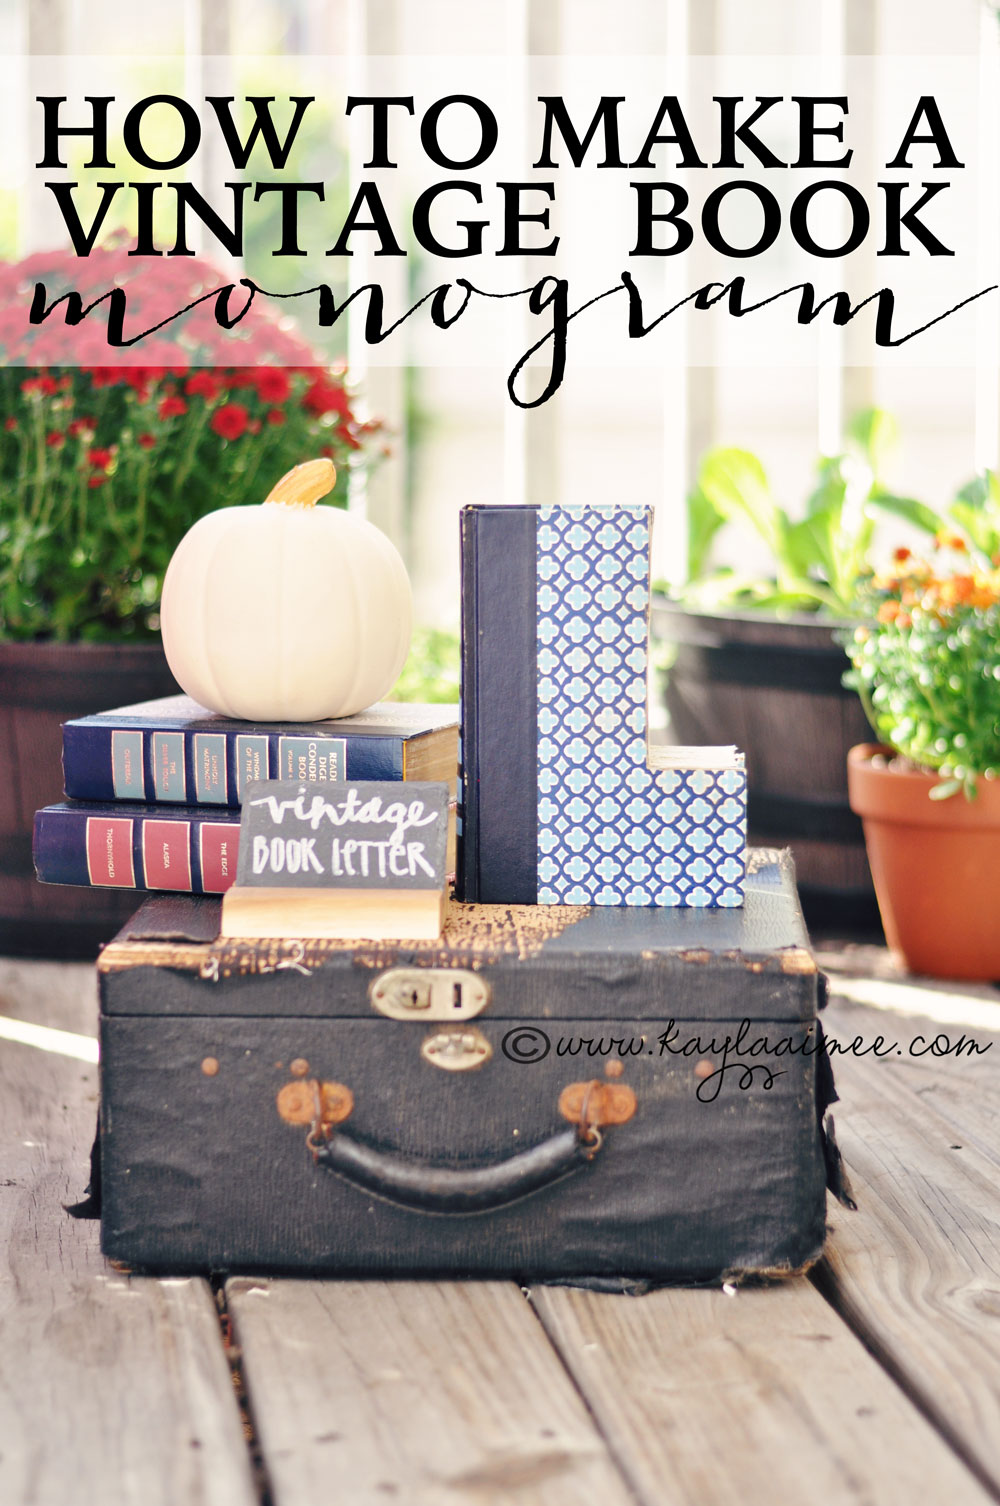 Vintage Book Letters: How To Make A Monogram From A Vintage Book